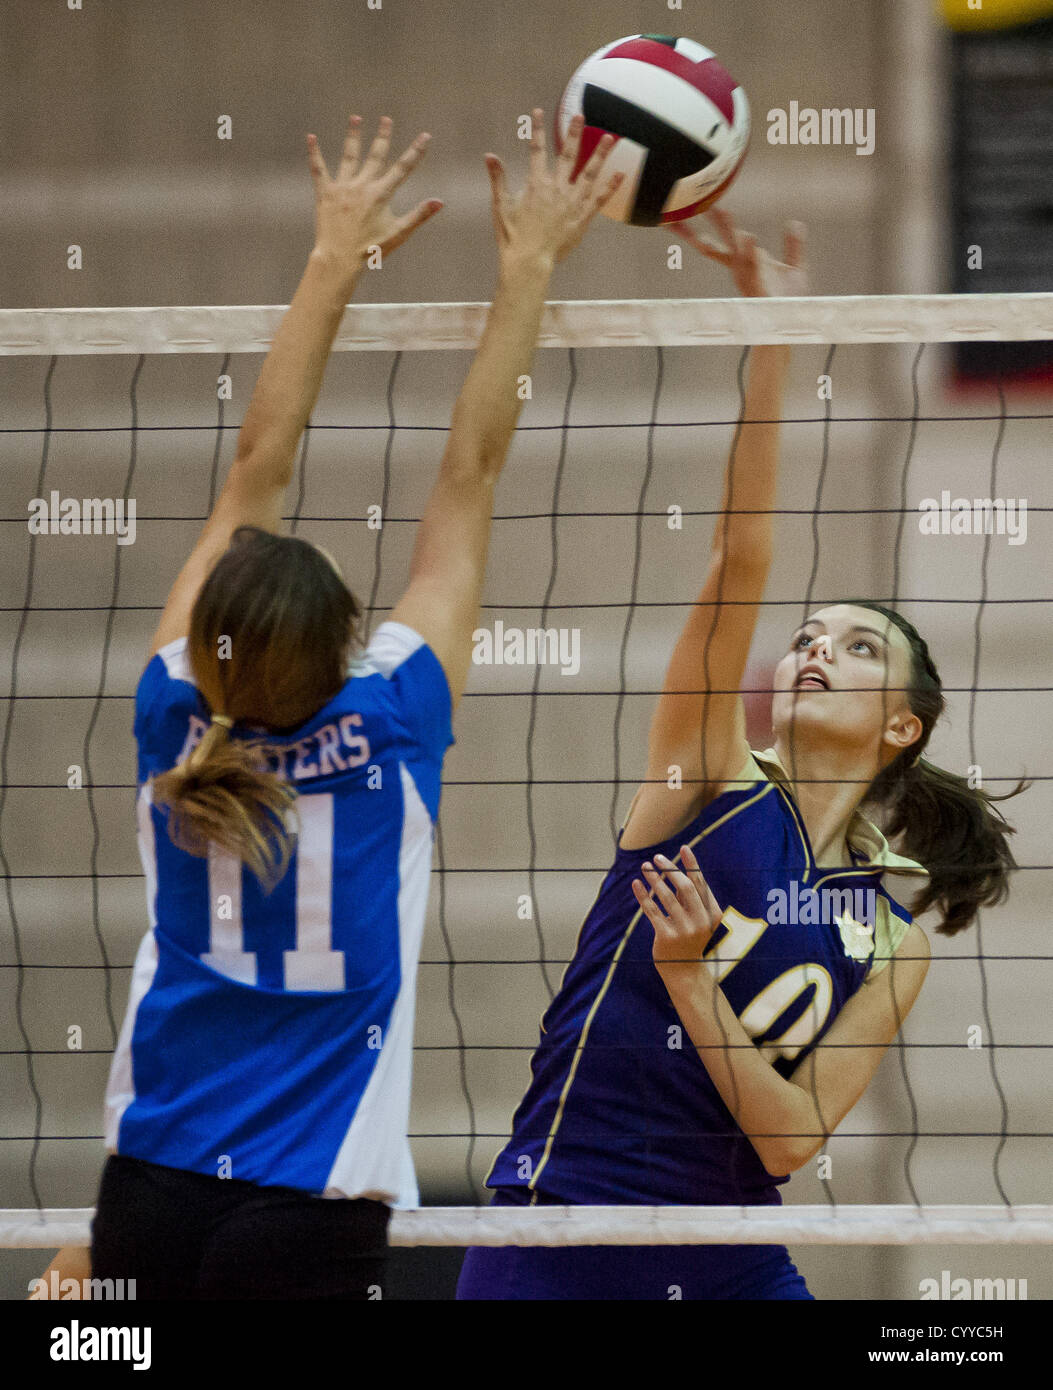 Nov. 12, 2012 - College Park, Maryland, U.S. - Smithsburg's Emily Seward hits the ball during the Sparrows Point High School versus Smithsburg High School match in the Semifinals of the Maryland State Volleyball 1A Championship at Ritchie Coliseum in College Park, Maryland on November 12, 2012. Smithsburg defeated Sparrows Point in straight sets 25-10, 25-12, 25-10 to advance to the State Finals. (Credit Image: © Scott Serio/Eclipse/ZUMAPRESS.com) Stock Photo